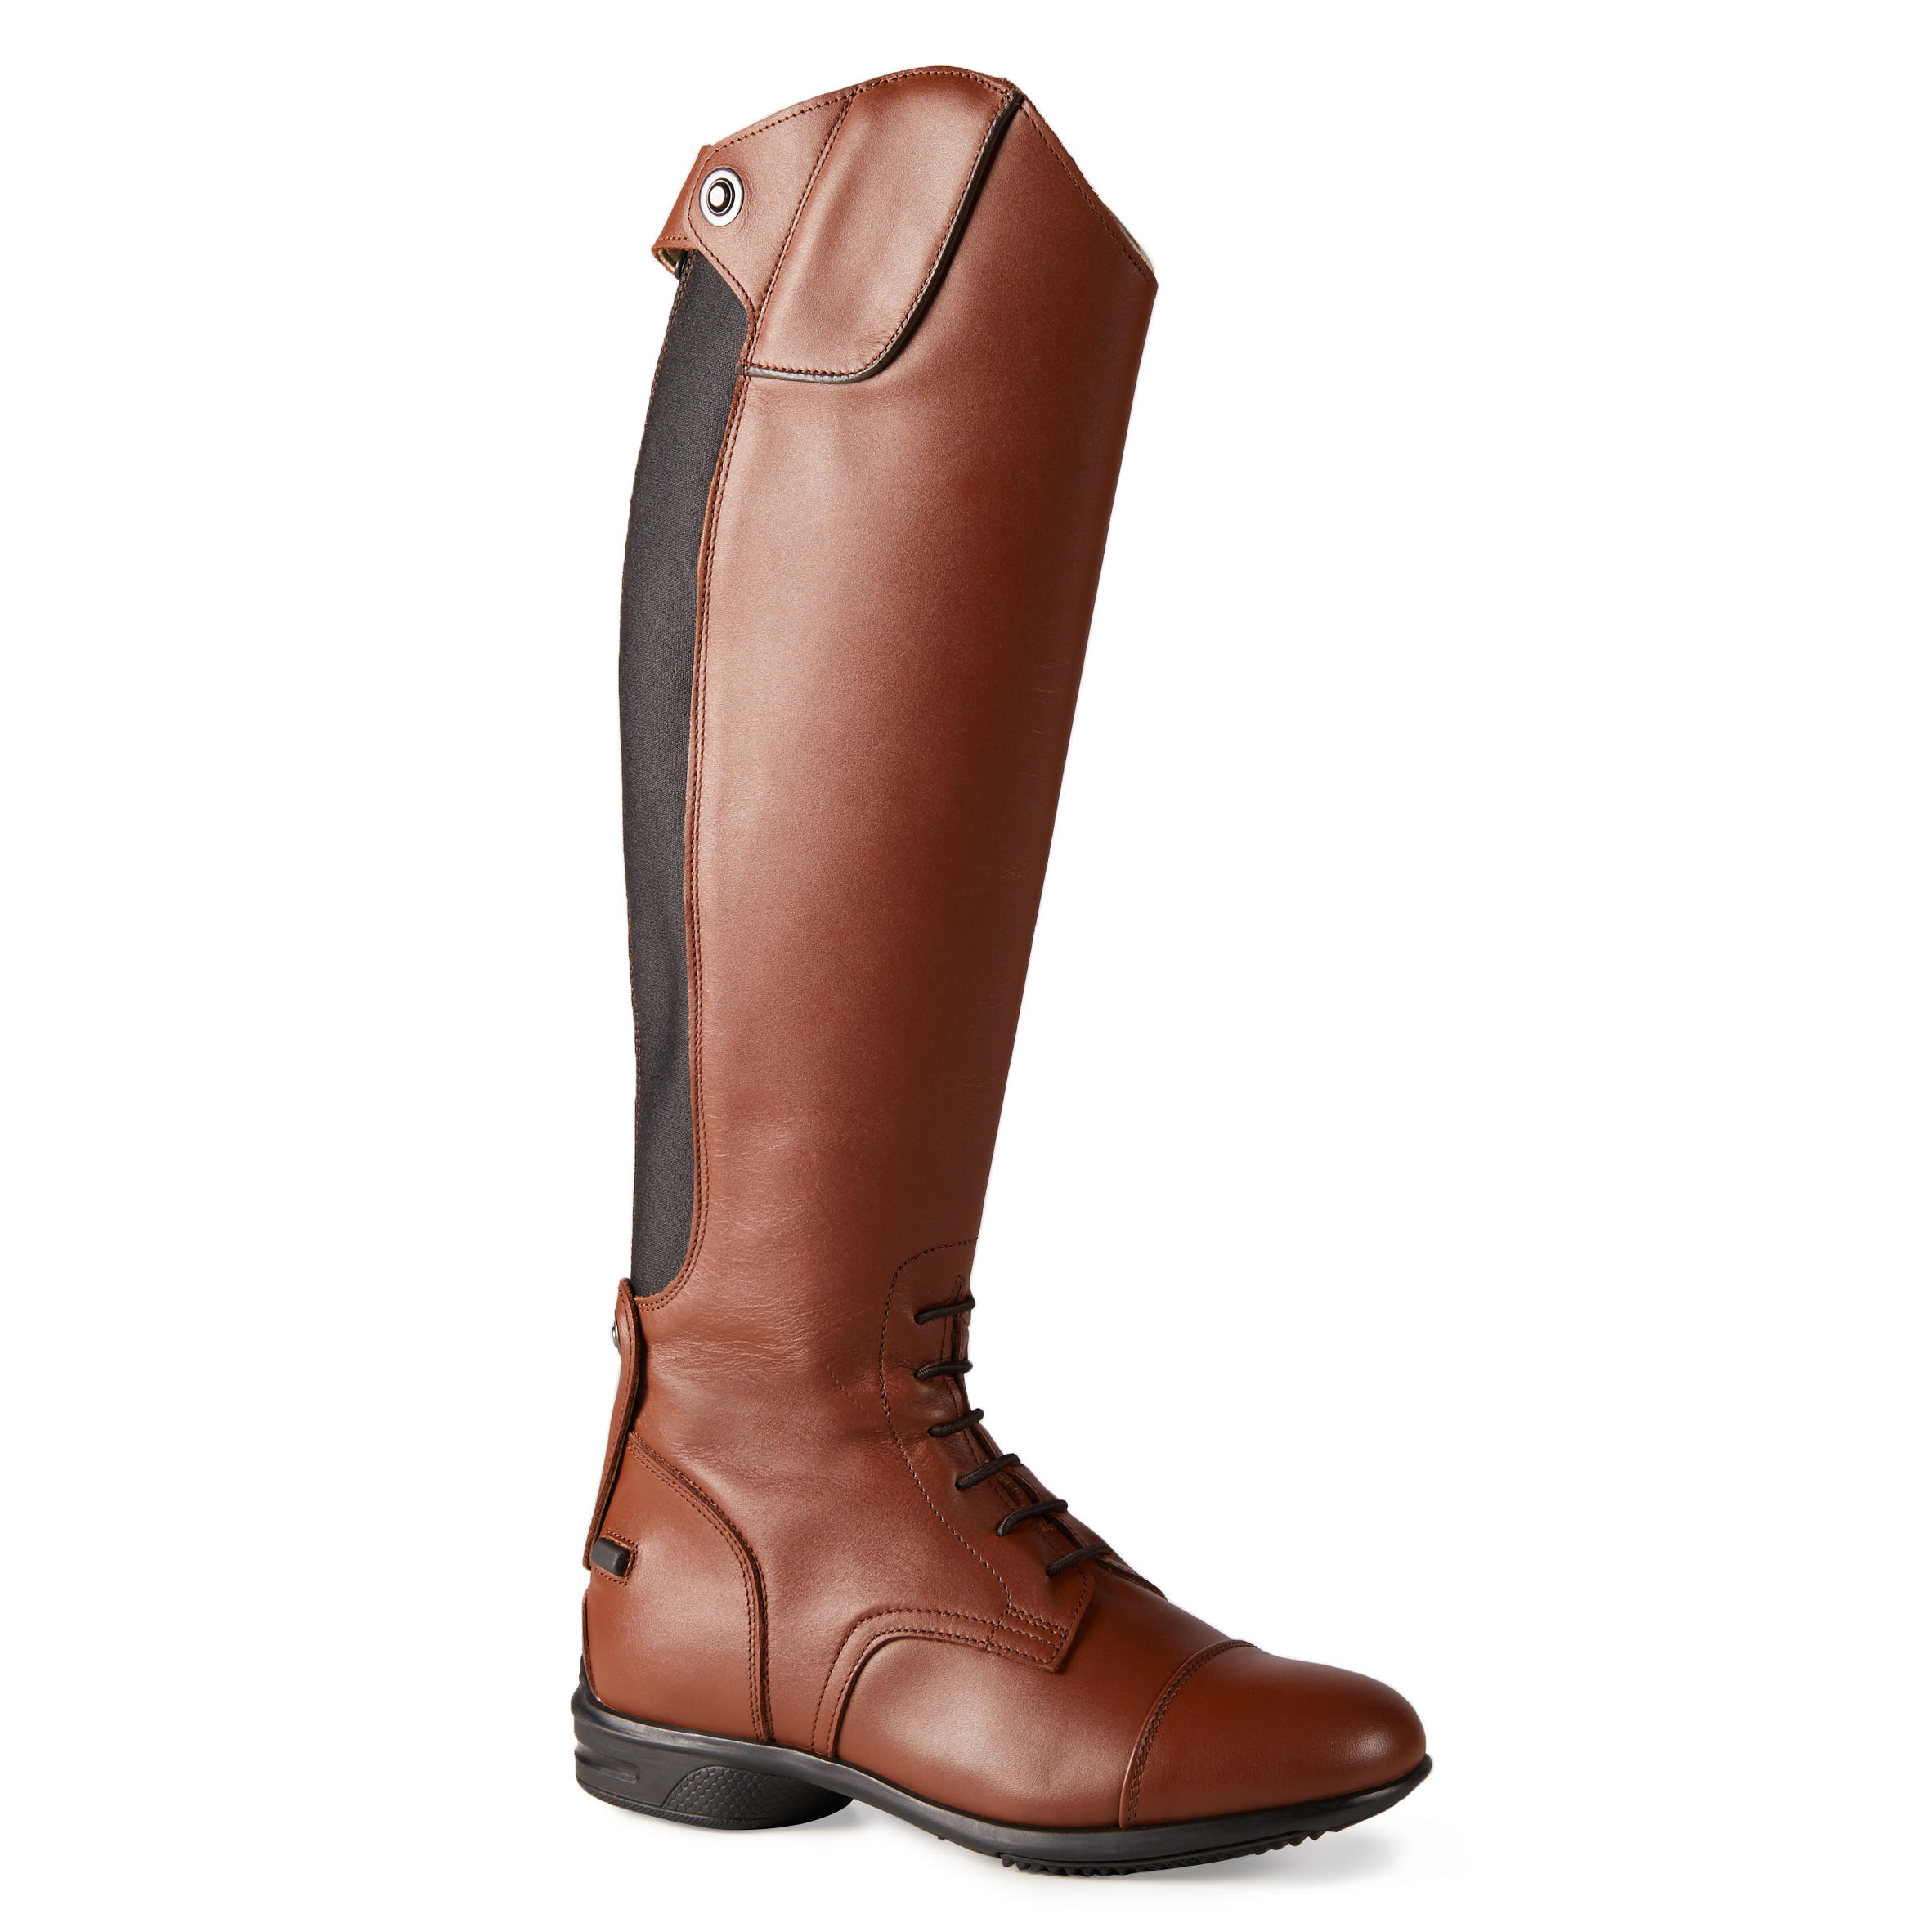 900 Jump M Adult Horse Riding Leather Long Boots - Brown 1/16